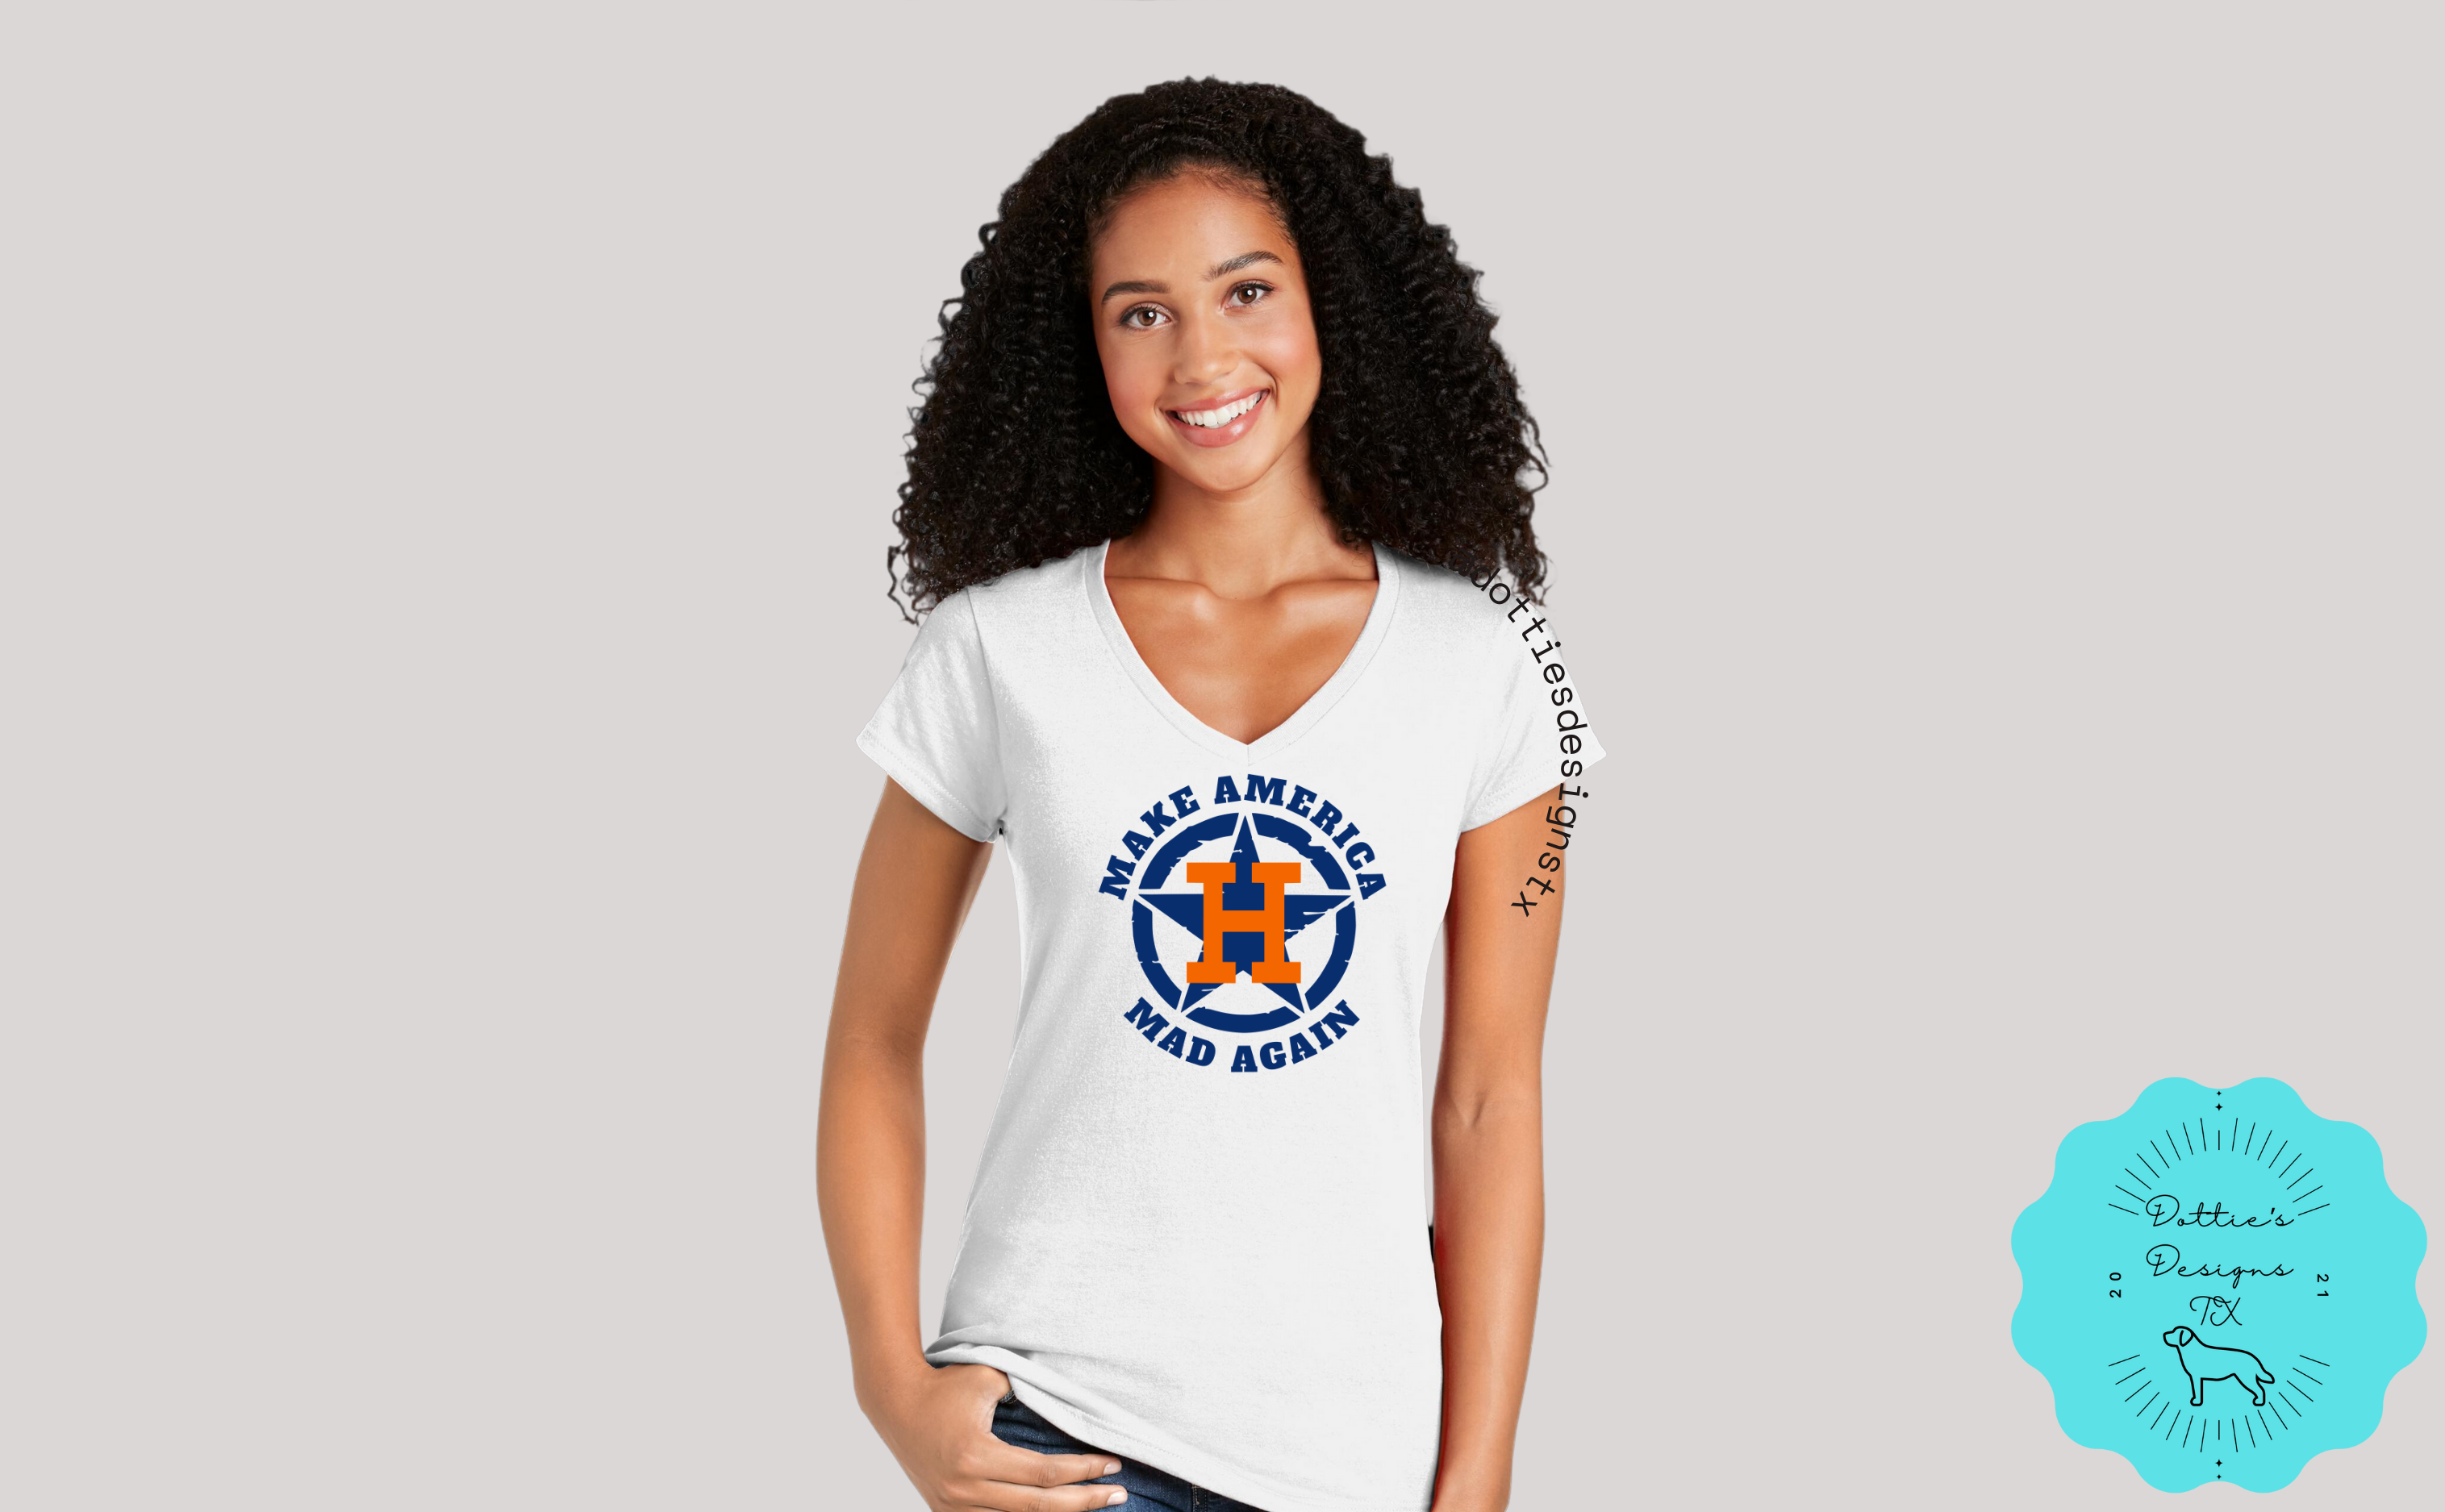 Make America Mad Again Astros Shirt, Astros Fan Shirts, Gifts for Houston  Astros Fans - Happy Place for Music Lovers